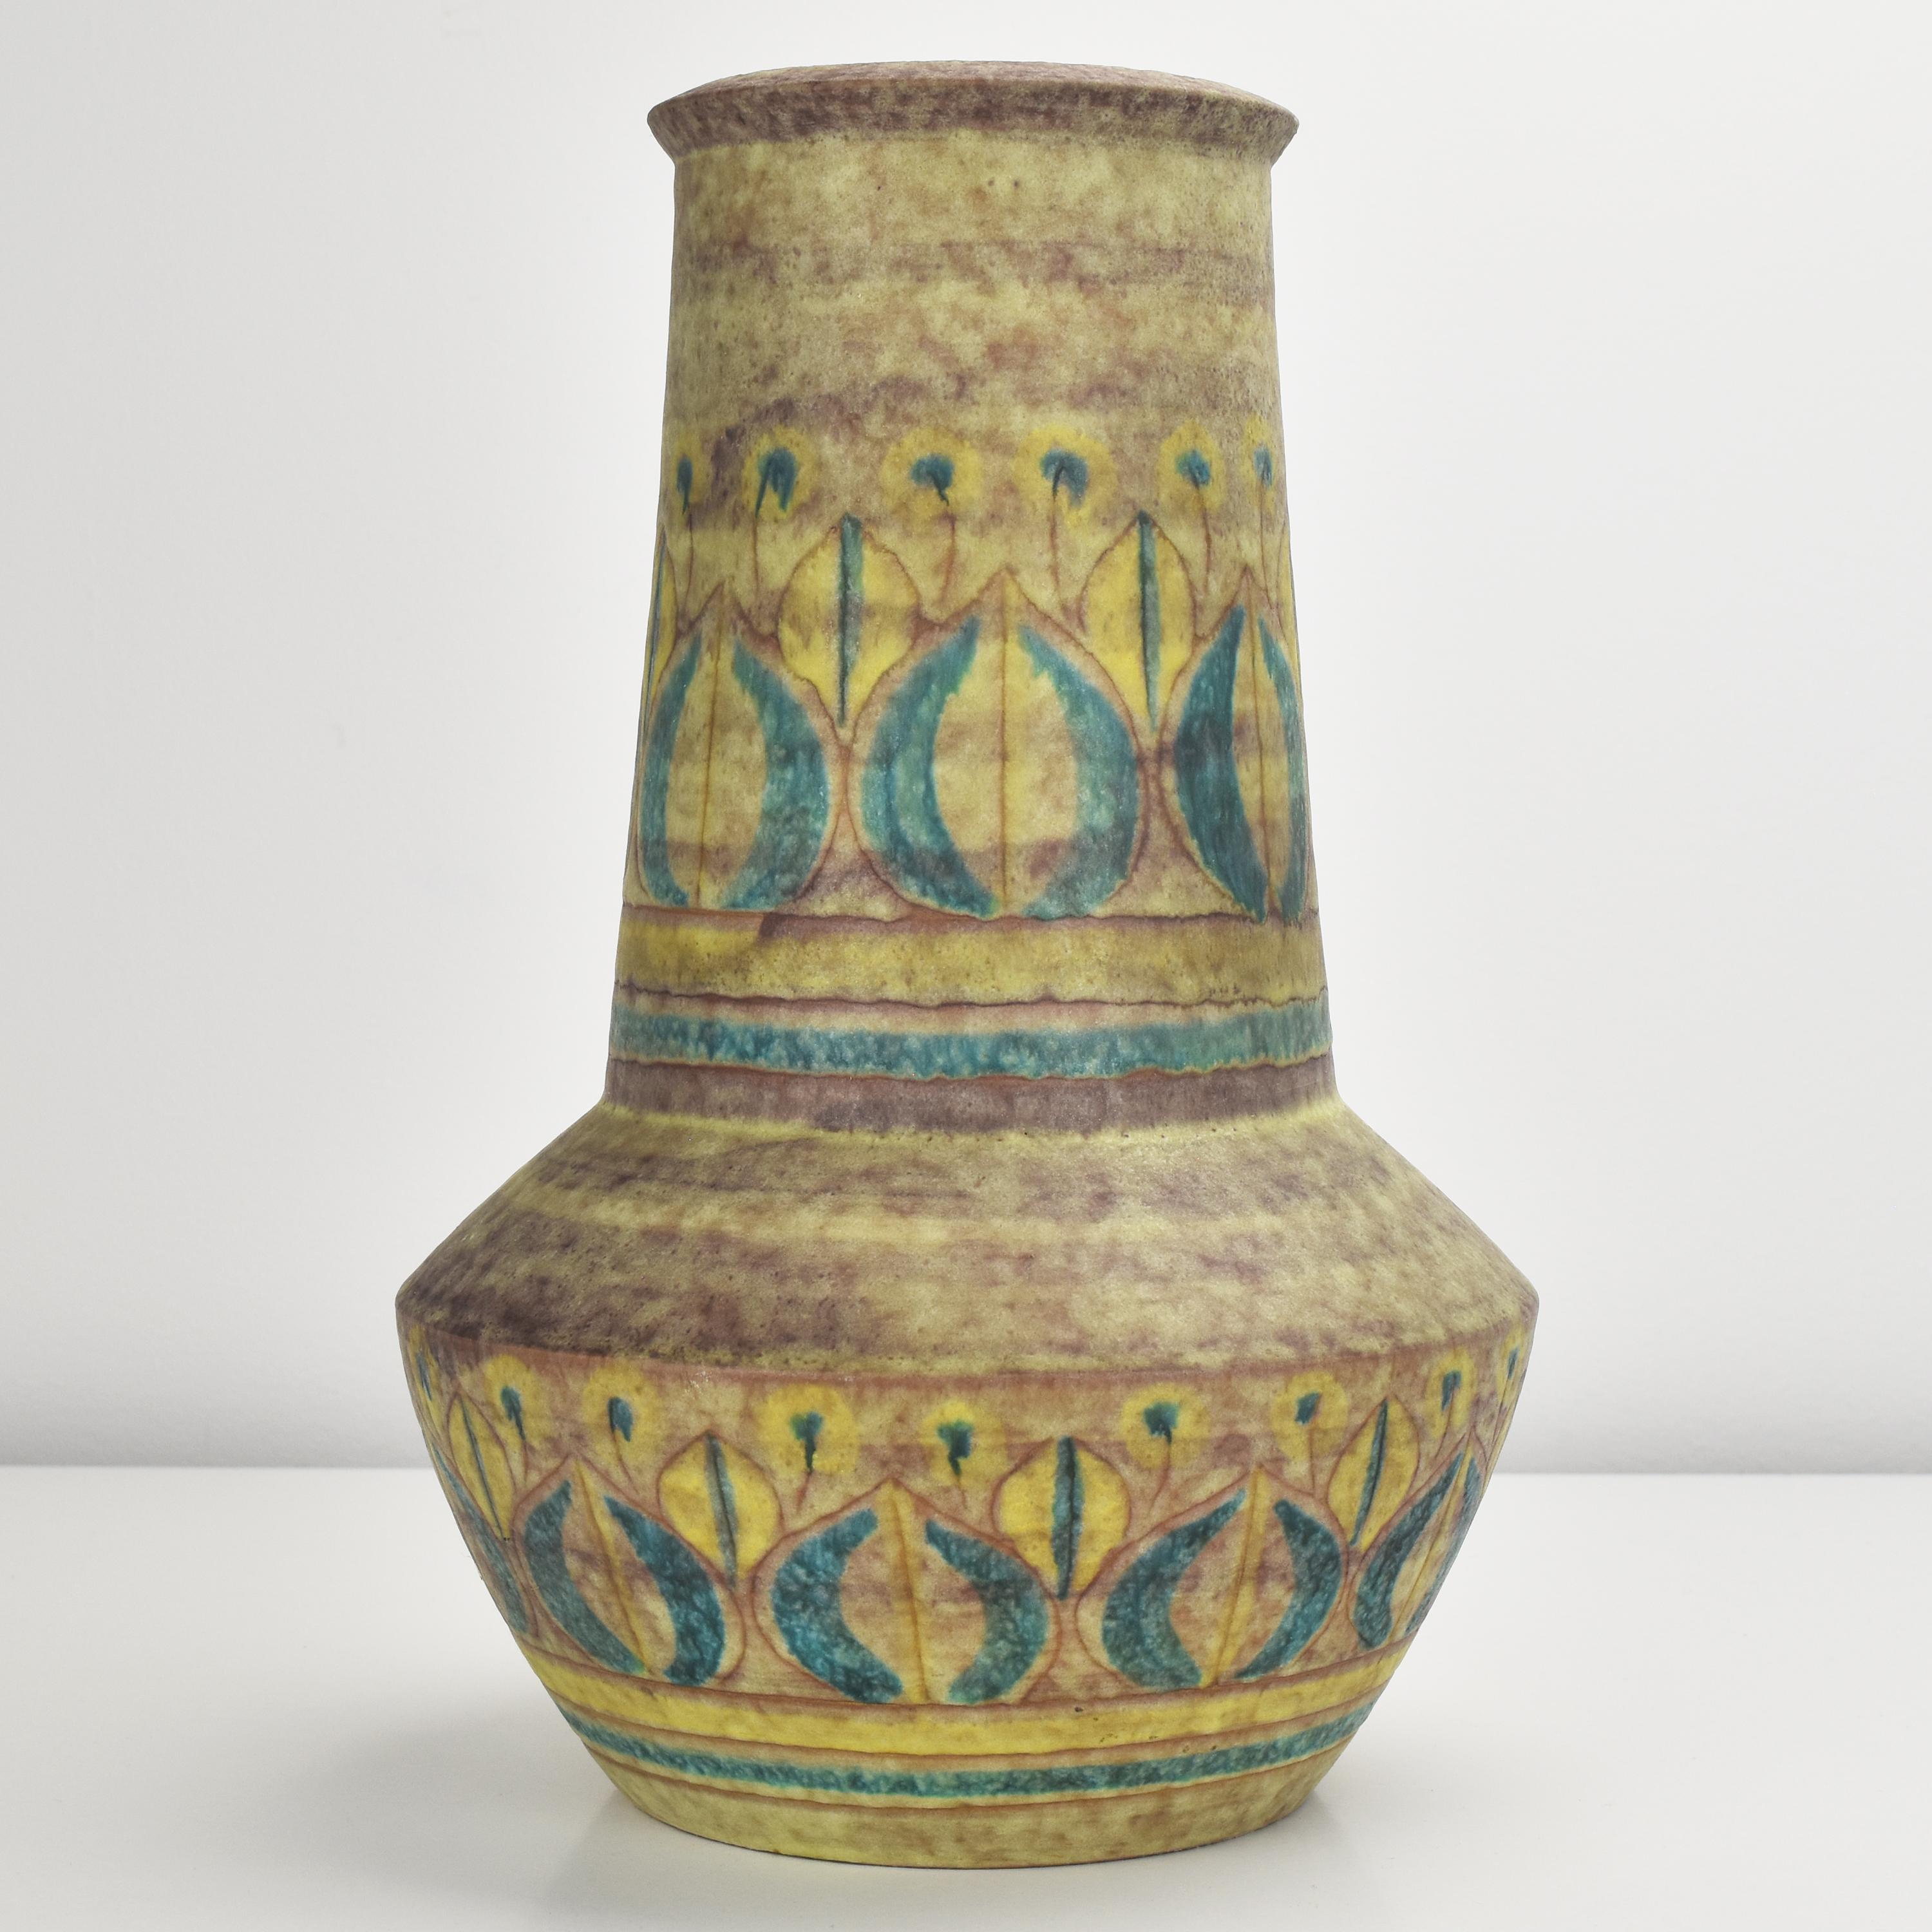 Highly decorativ floral patterned pottery vase by Alvino Bagni dating to the 1960s.